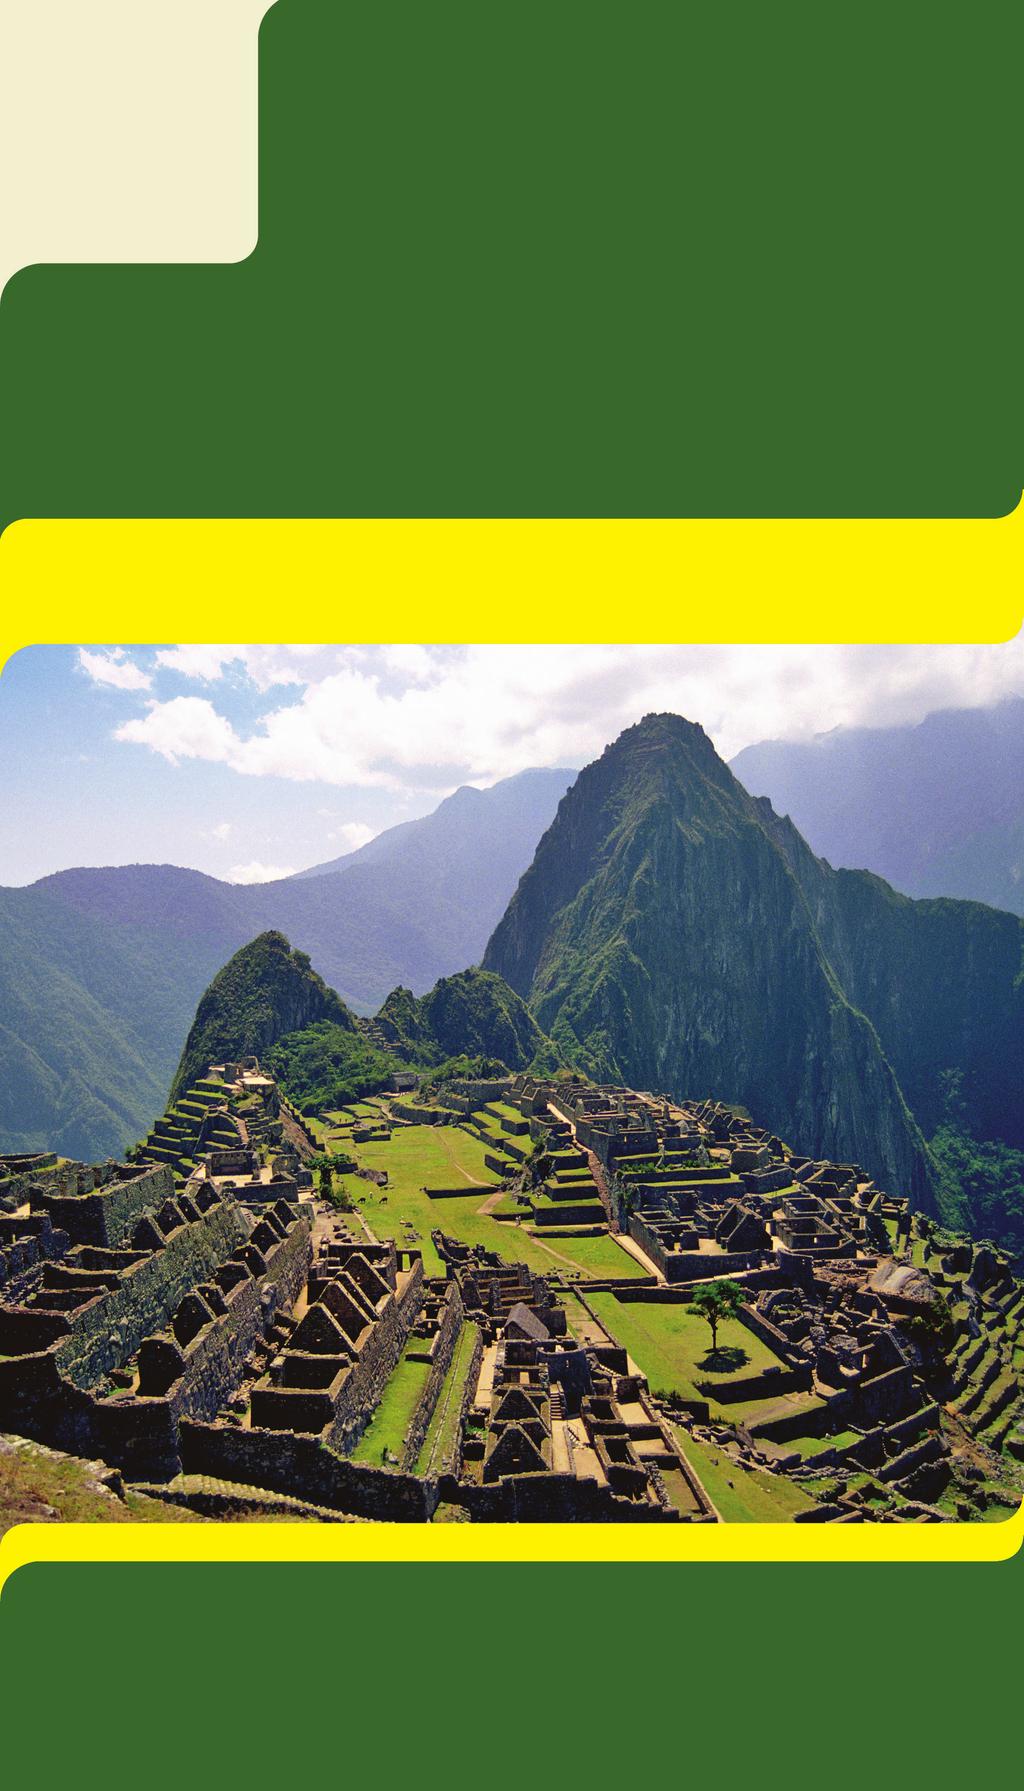 The Association of Former Students of Texas A&M University presents TREASURES OF PERU With Machu Picchu & Lake Titicaca May 16-26, 2016 11 days for $4,749 total price from Houston ($4,195 air & land